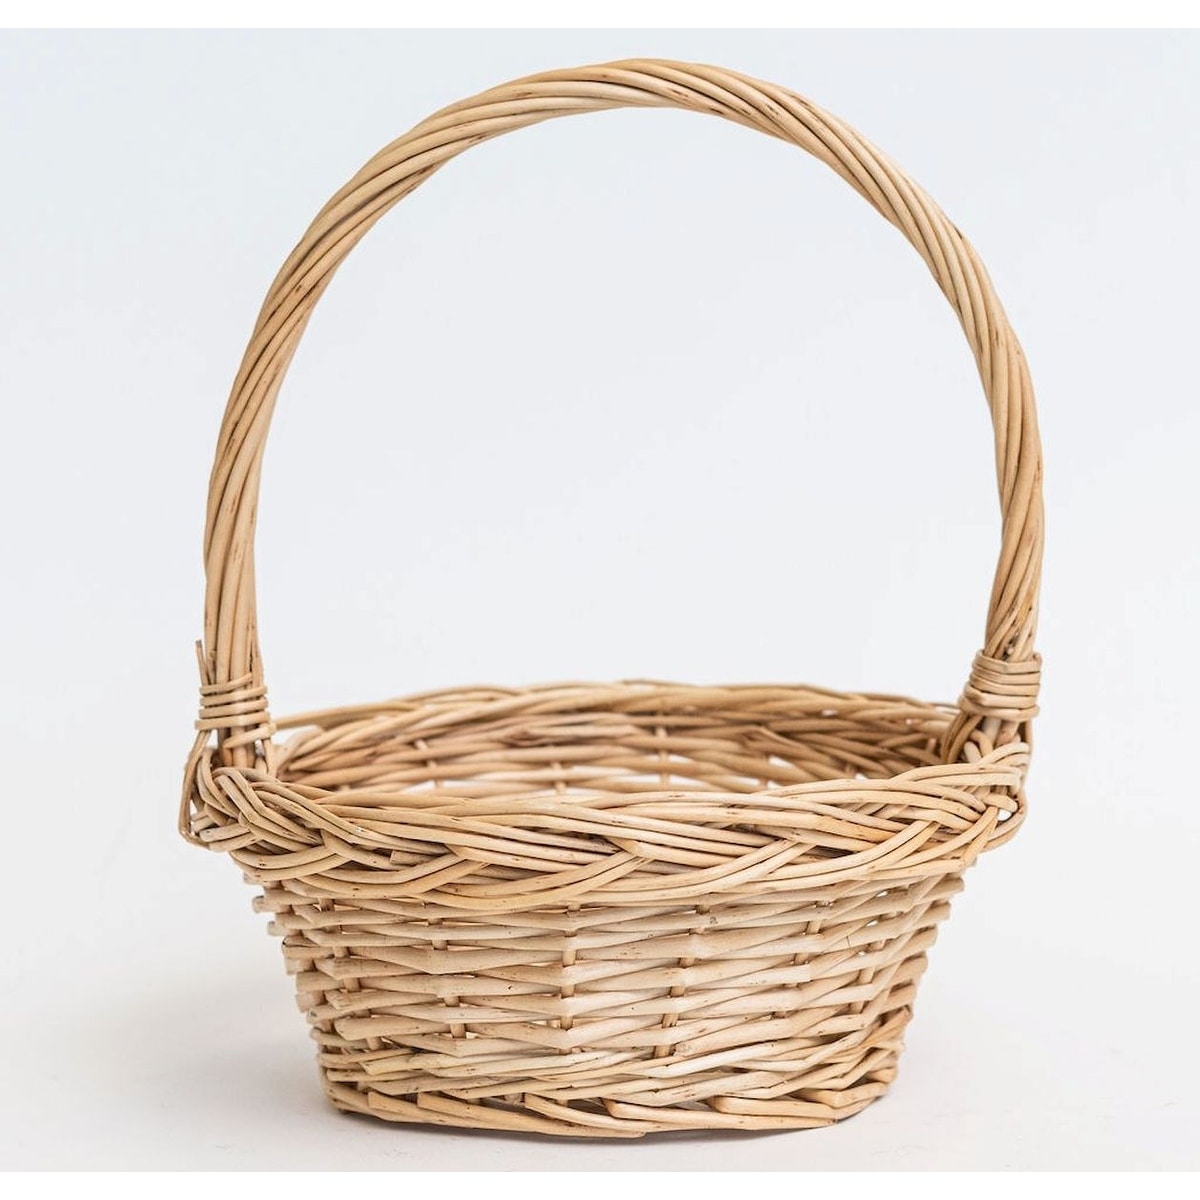 https://ak1.ostkcdn.com/images/products/is/images/direct/e07346daa881ad6ae8e72d7f3924932d4db69425/Natural-Willow-With-Handle-Basket.jpg